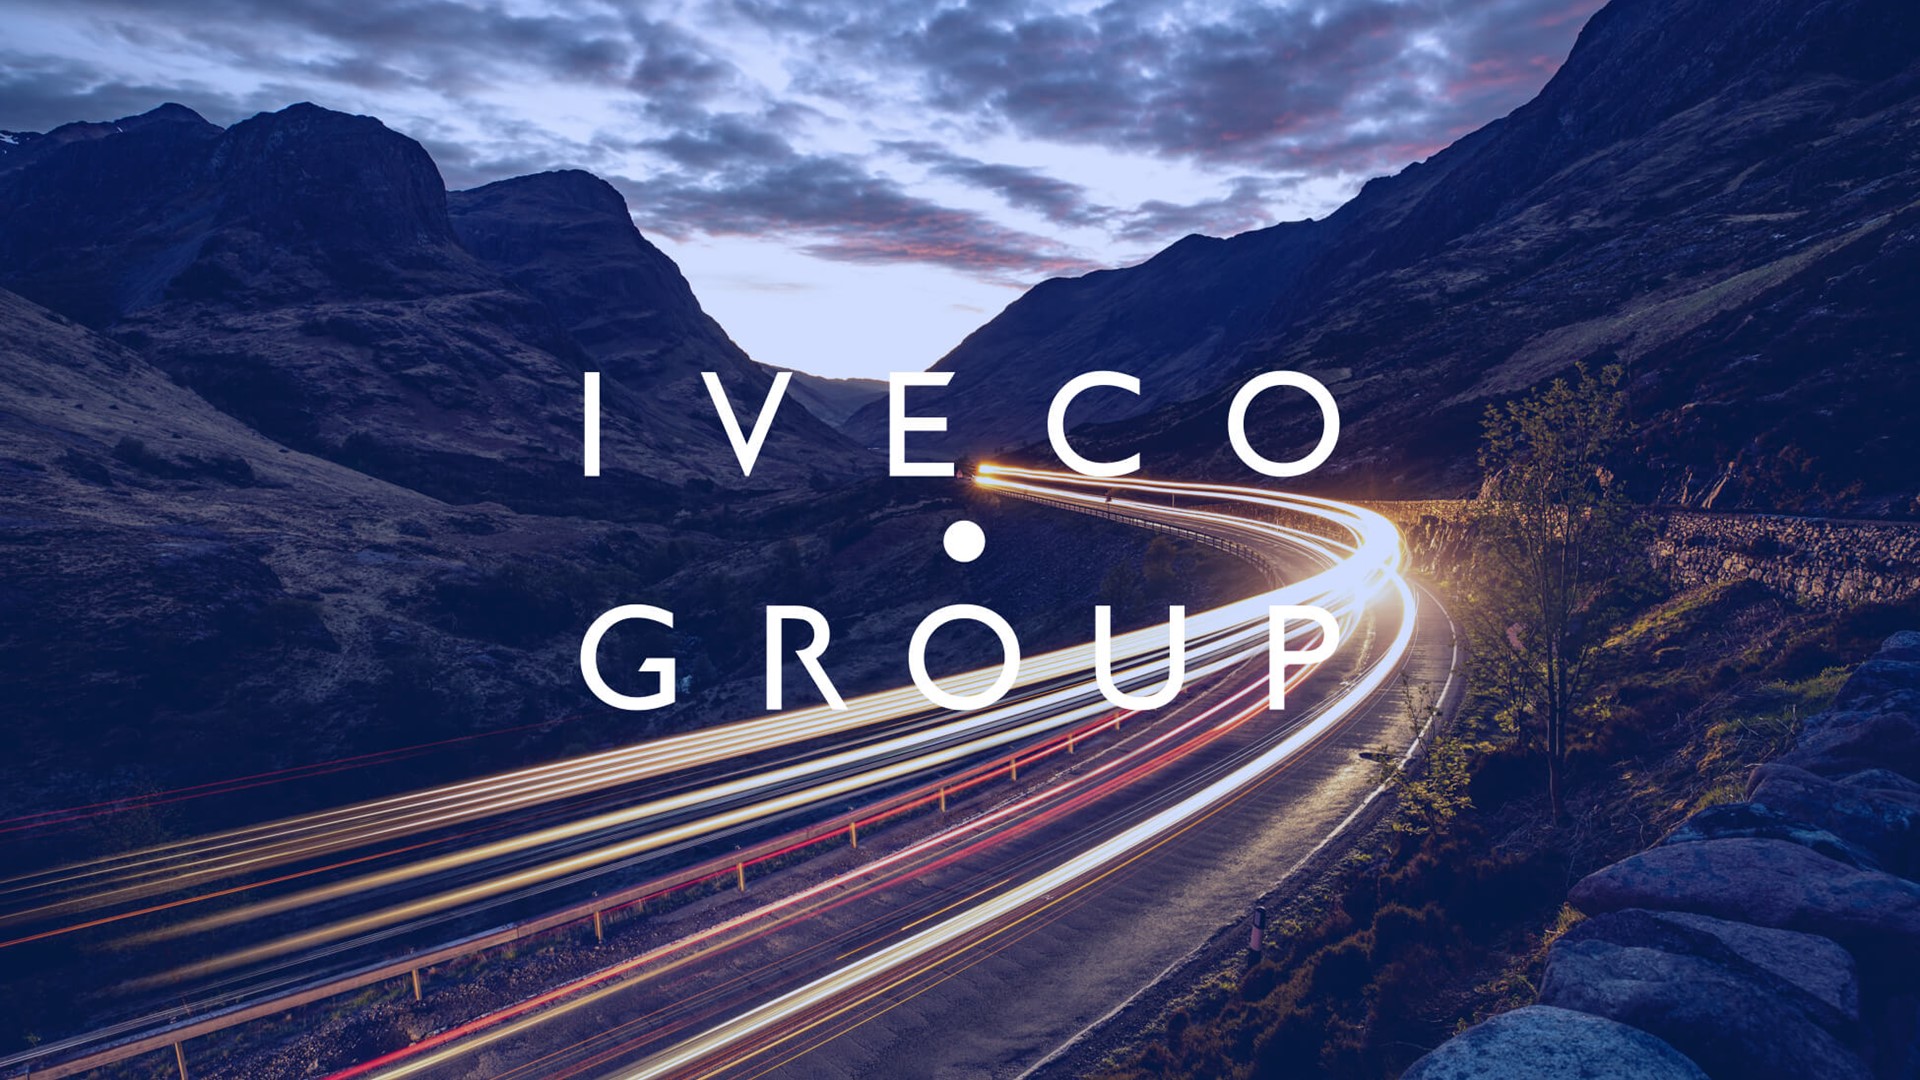 Iveco Group - background 15